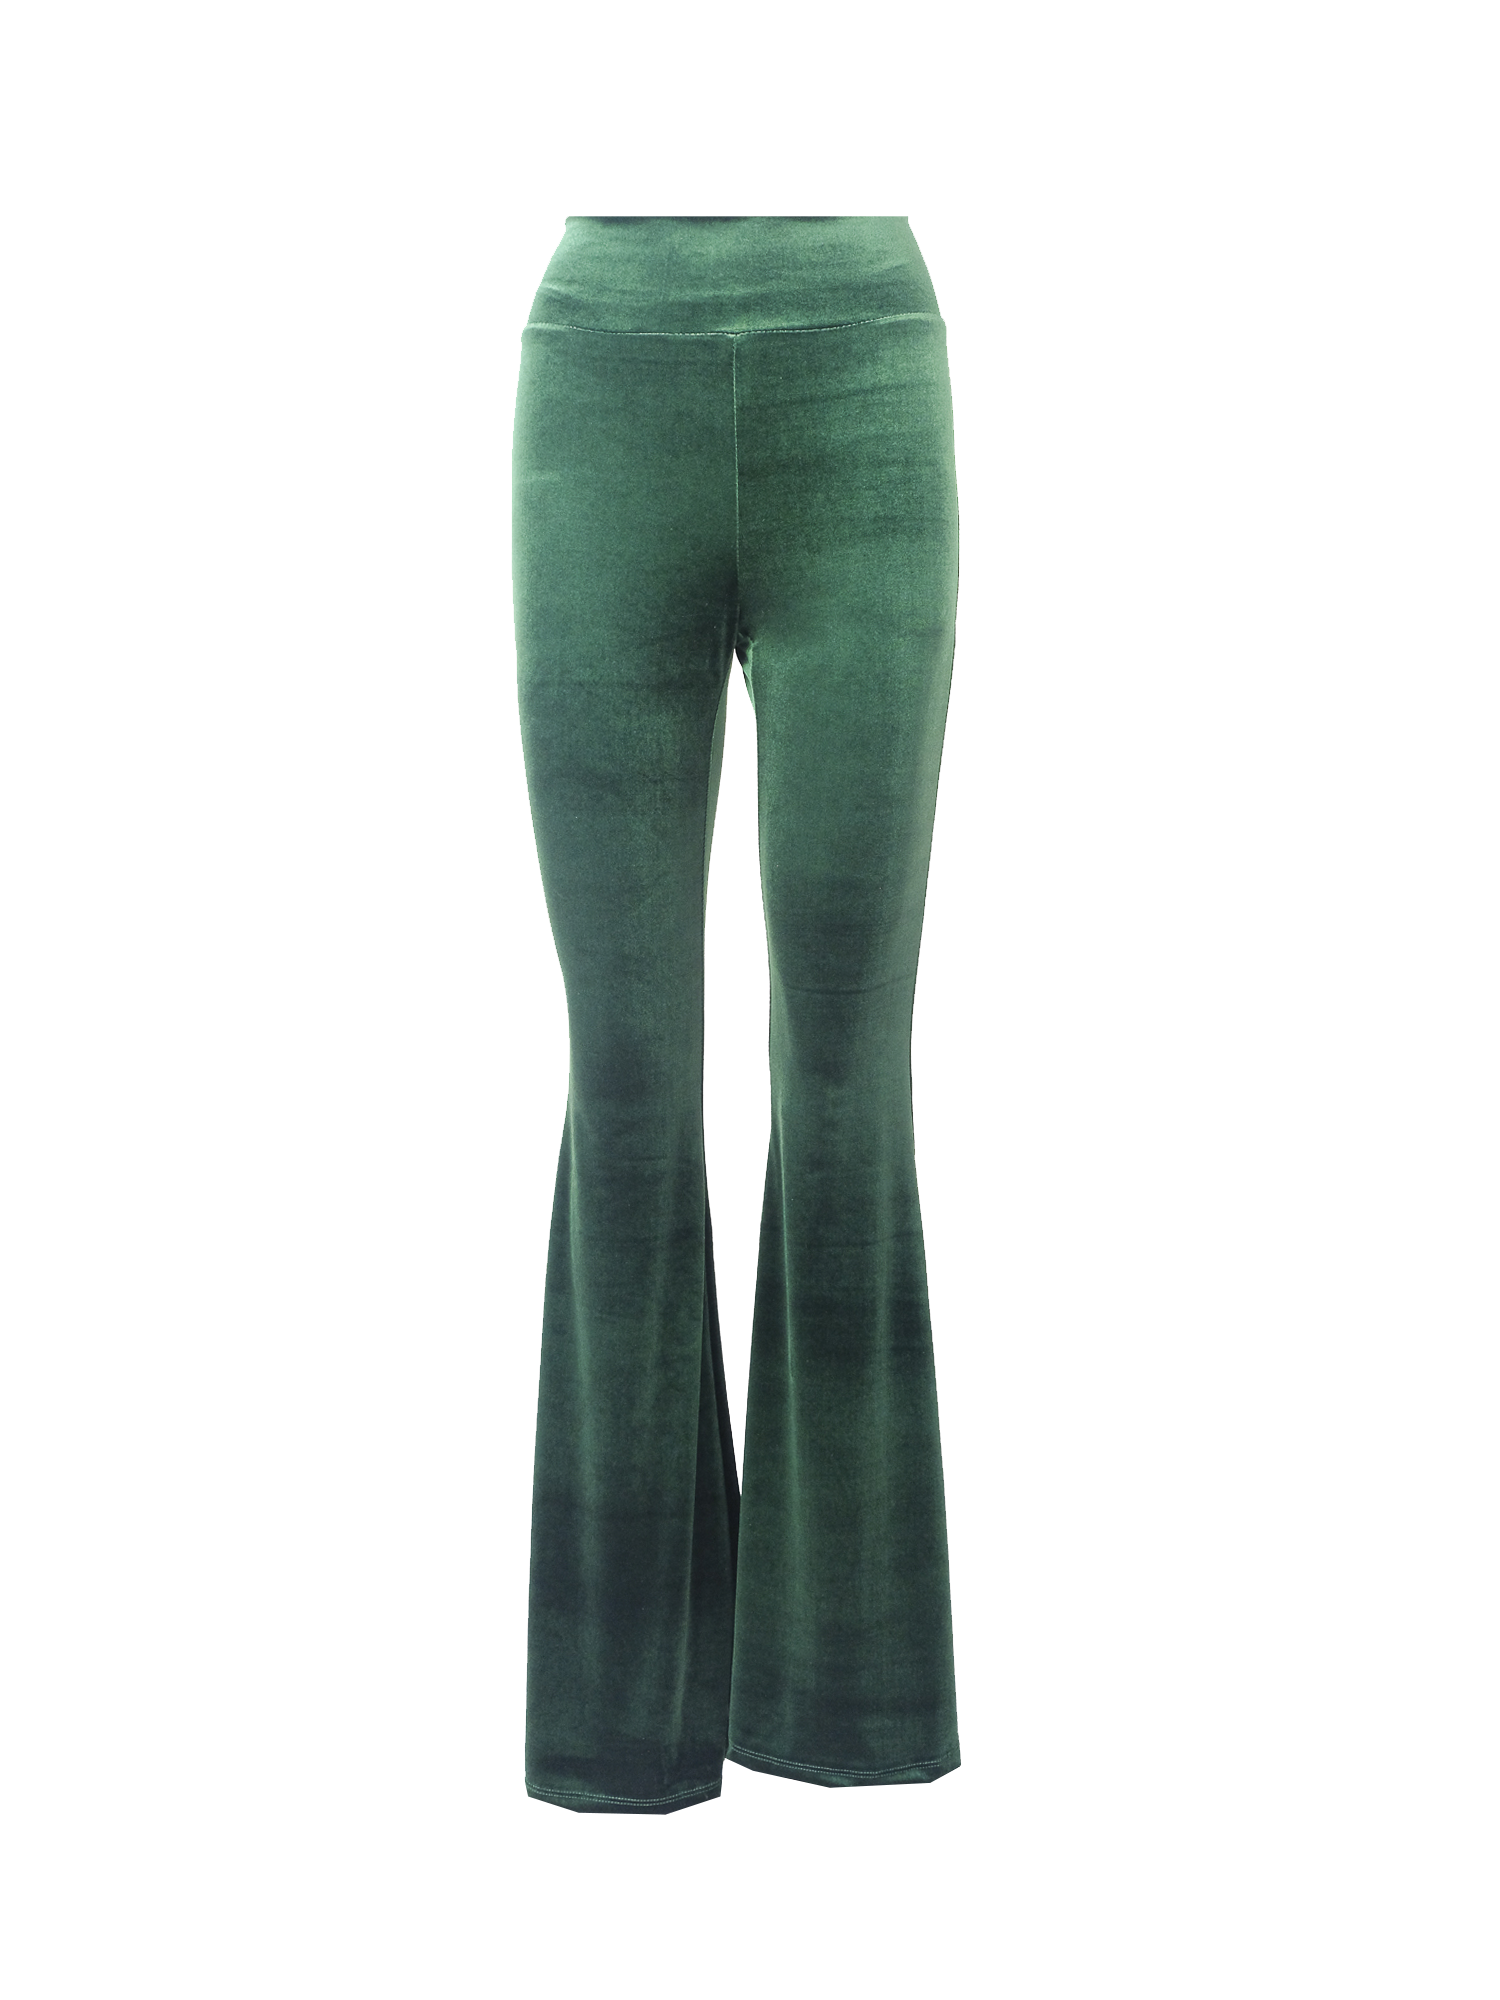 LOLA - flared pants in emerald green chenille